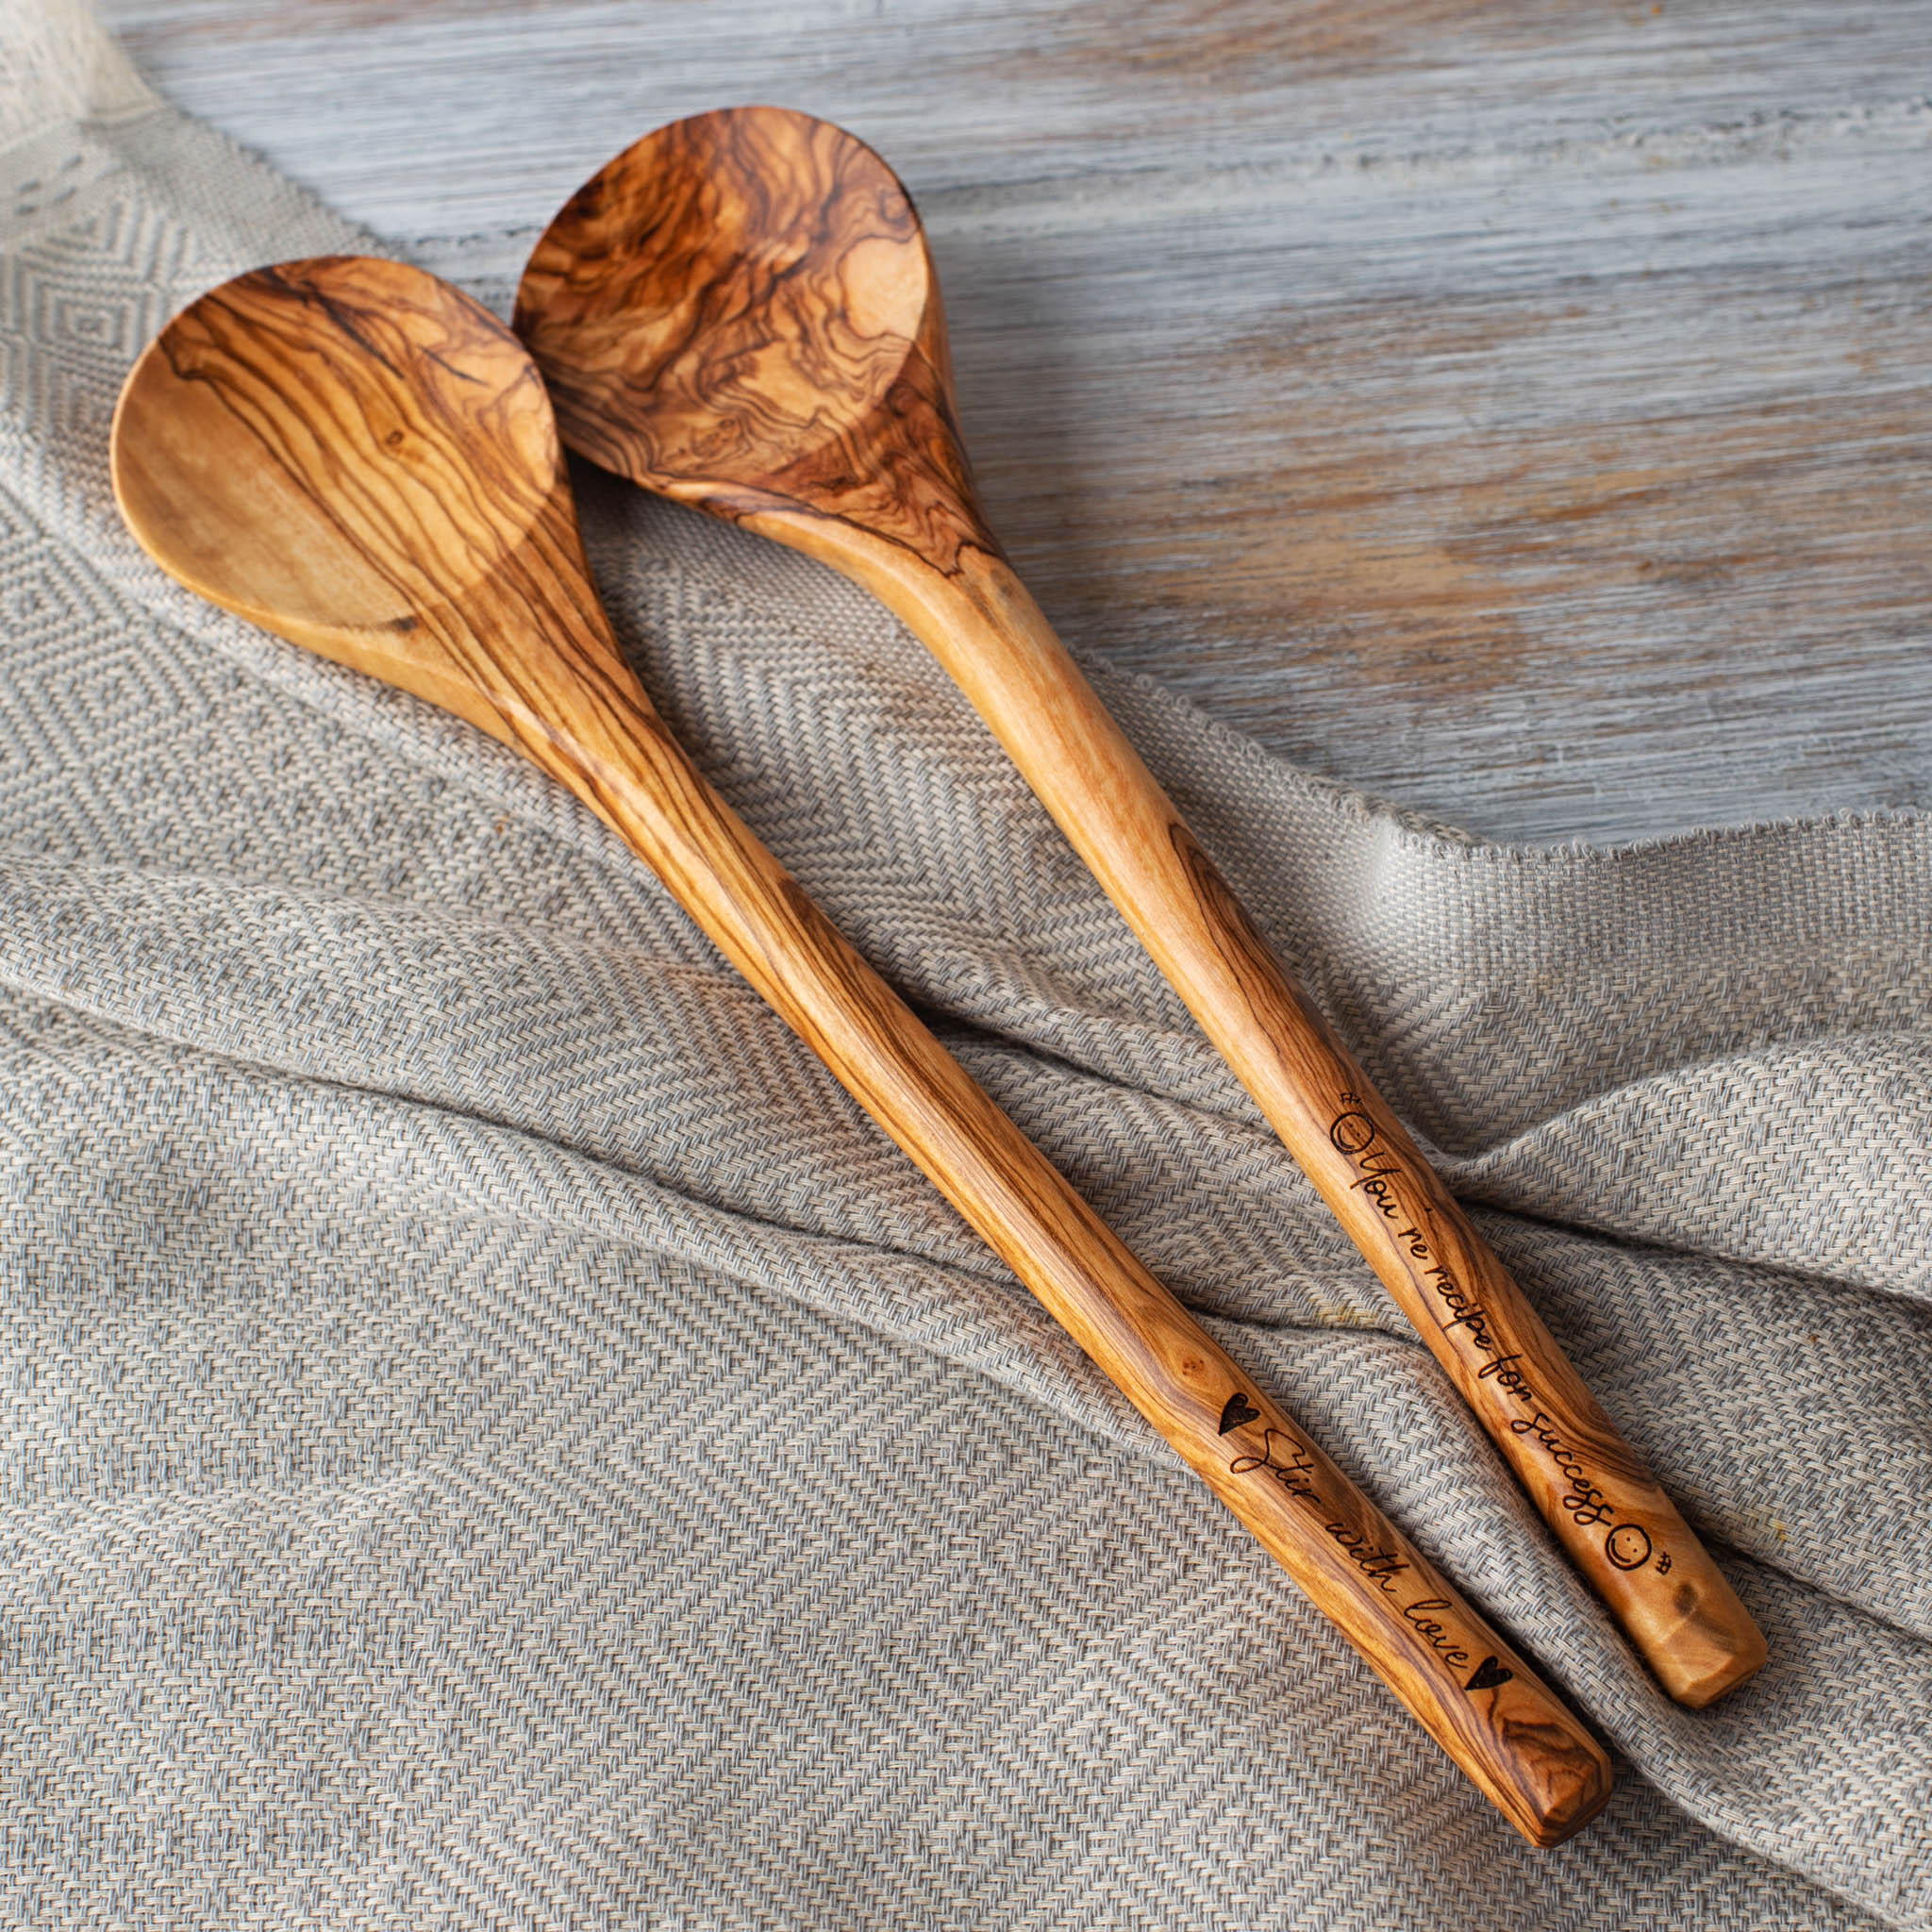 Personalized Olive Wood Cooking Spoons Round (Set of 2) - Forest Decor